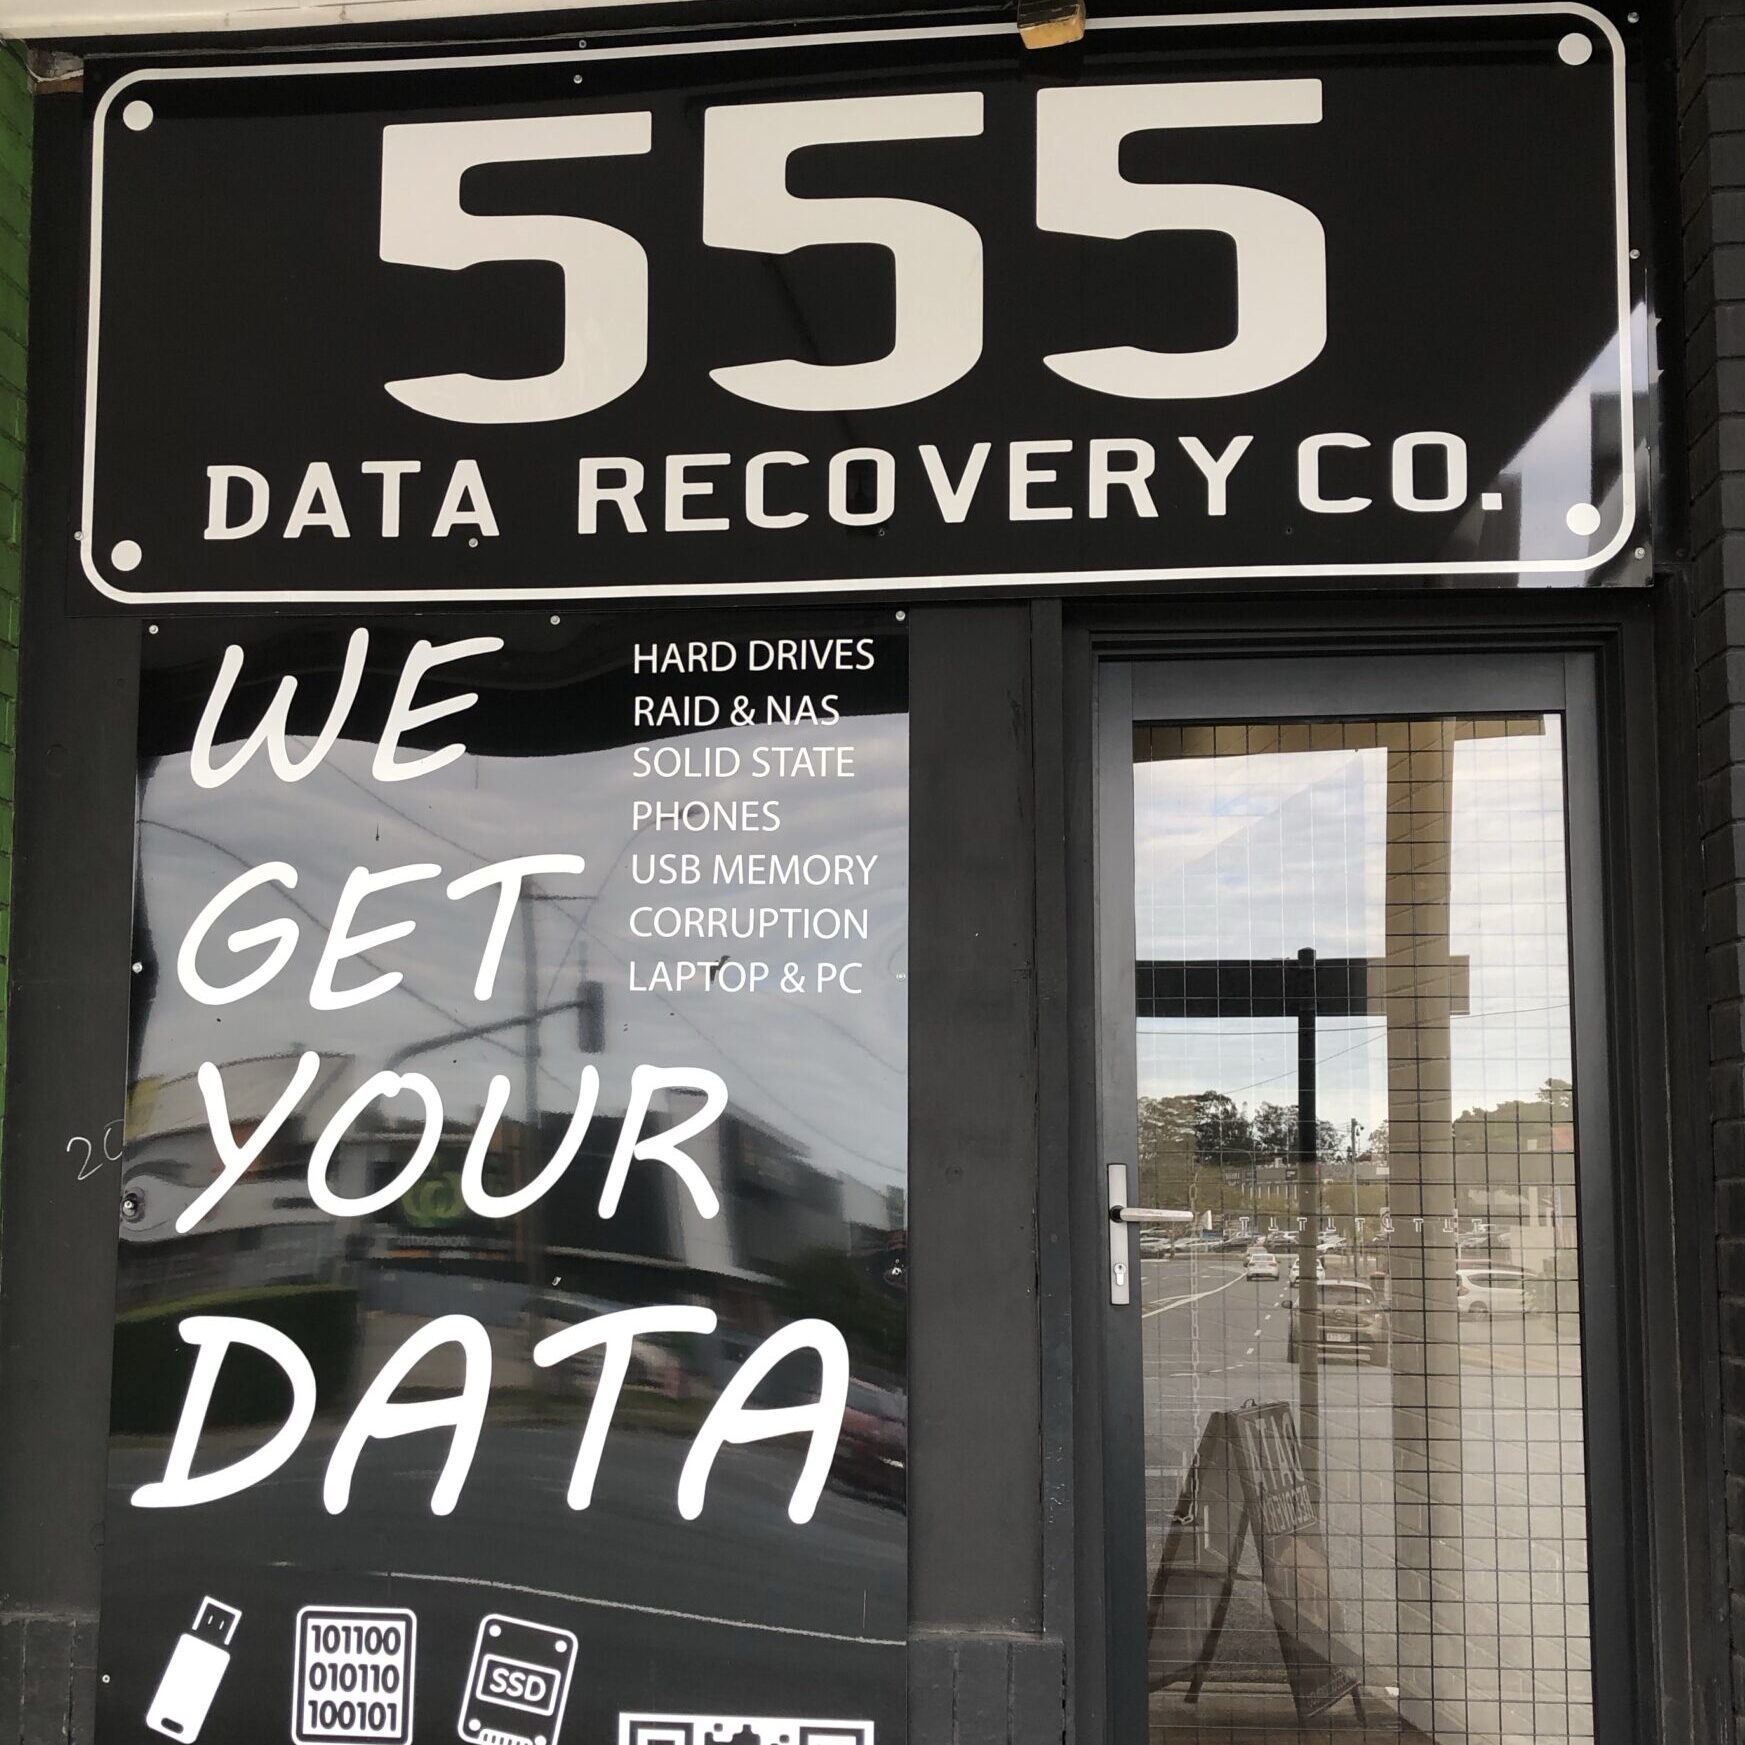 555 Data Recovery Co.